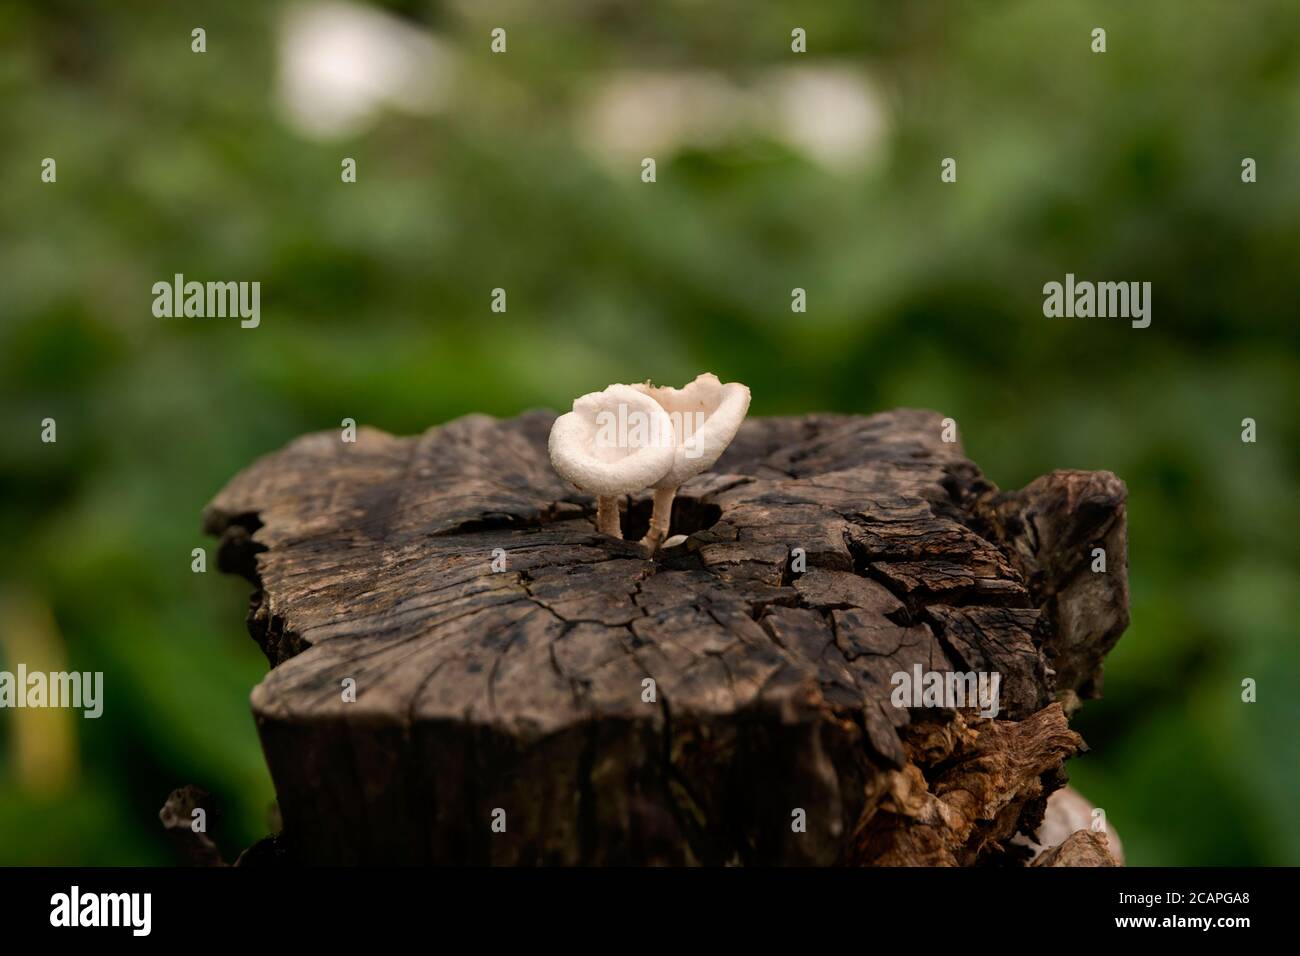 Mushrooms or fungus on a old rotten wood Stock Photo